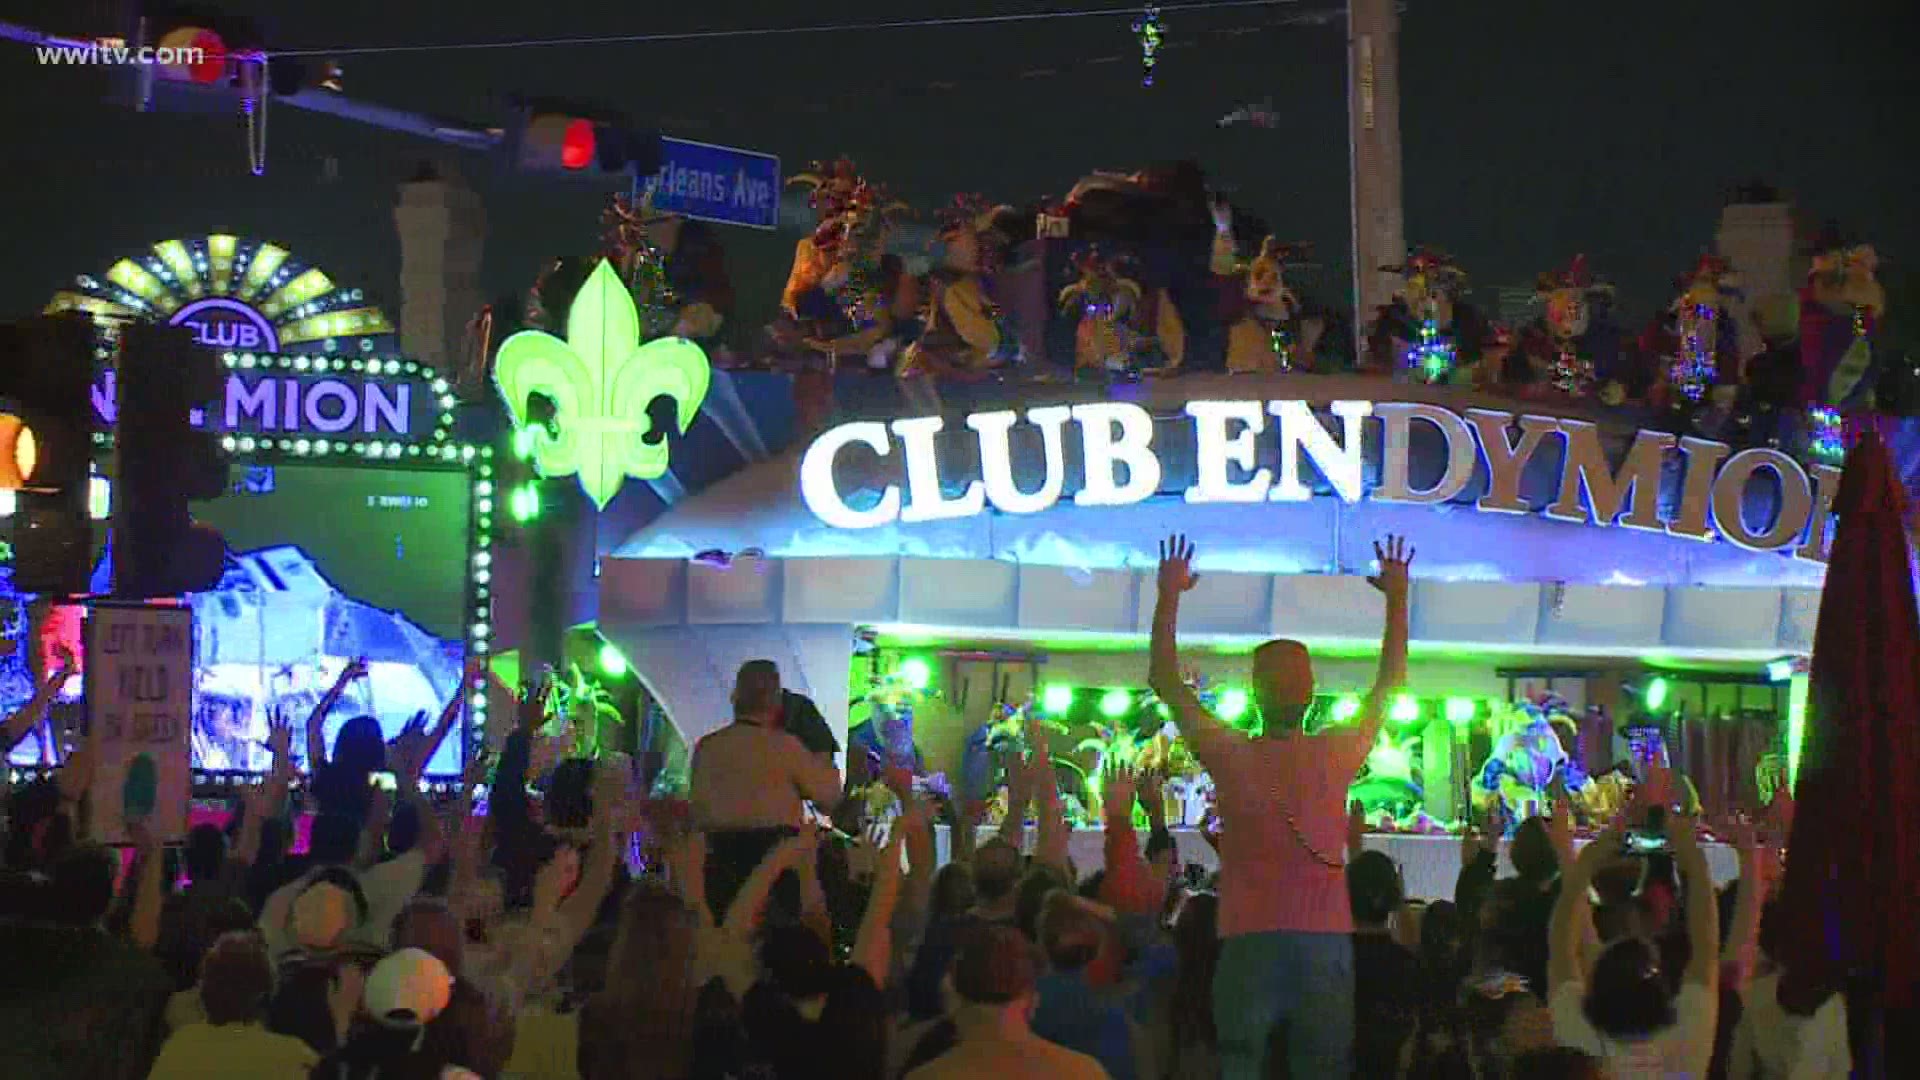 New Orleans city council is trying to find a way to control Mardi Gras crowds in a COVID world.